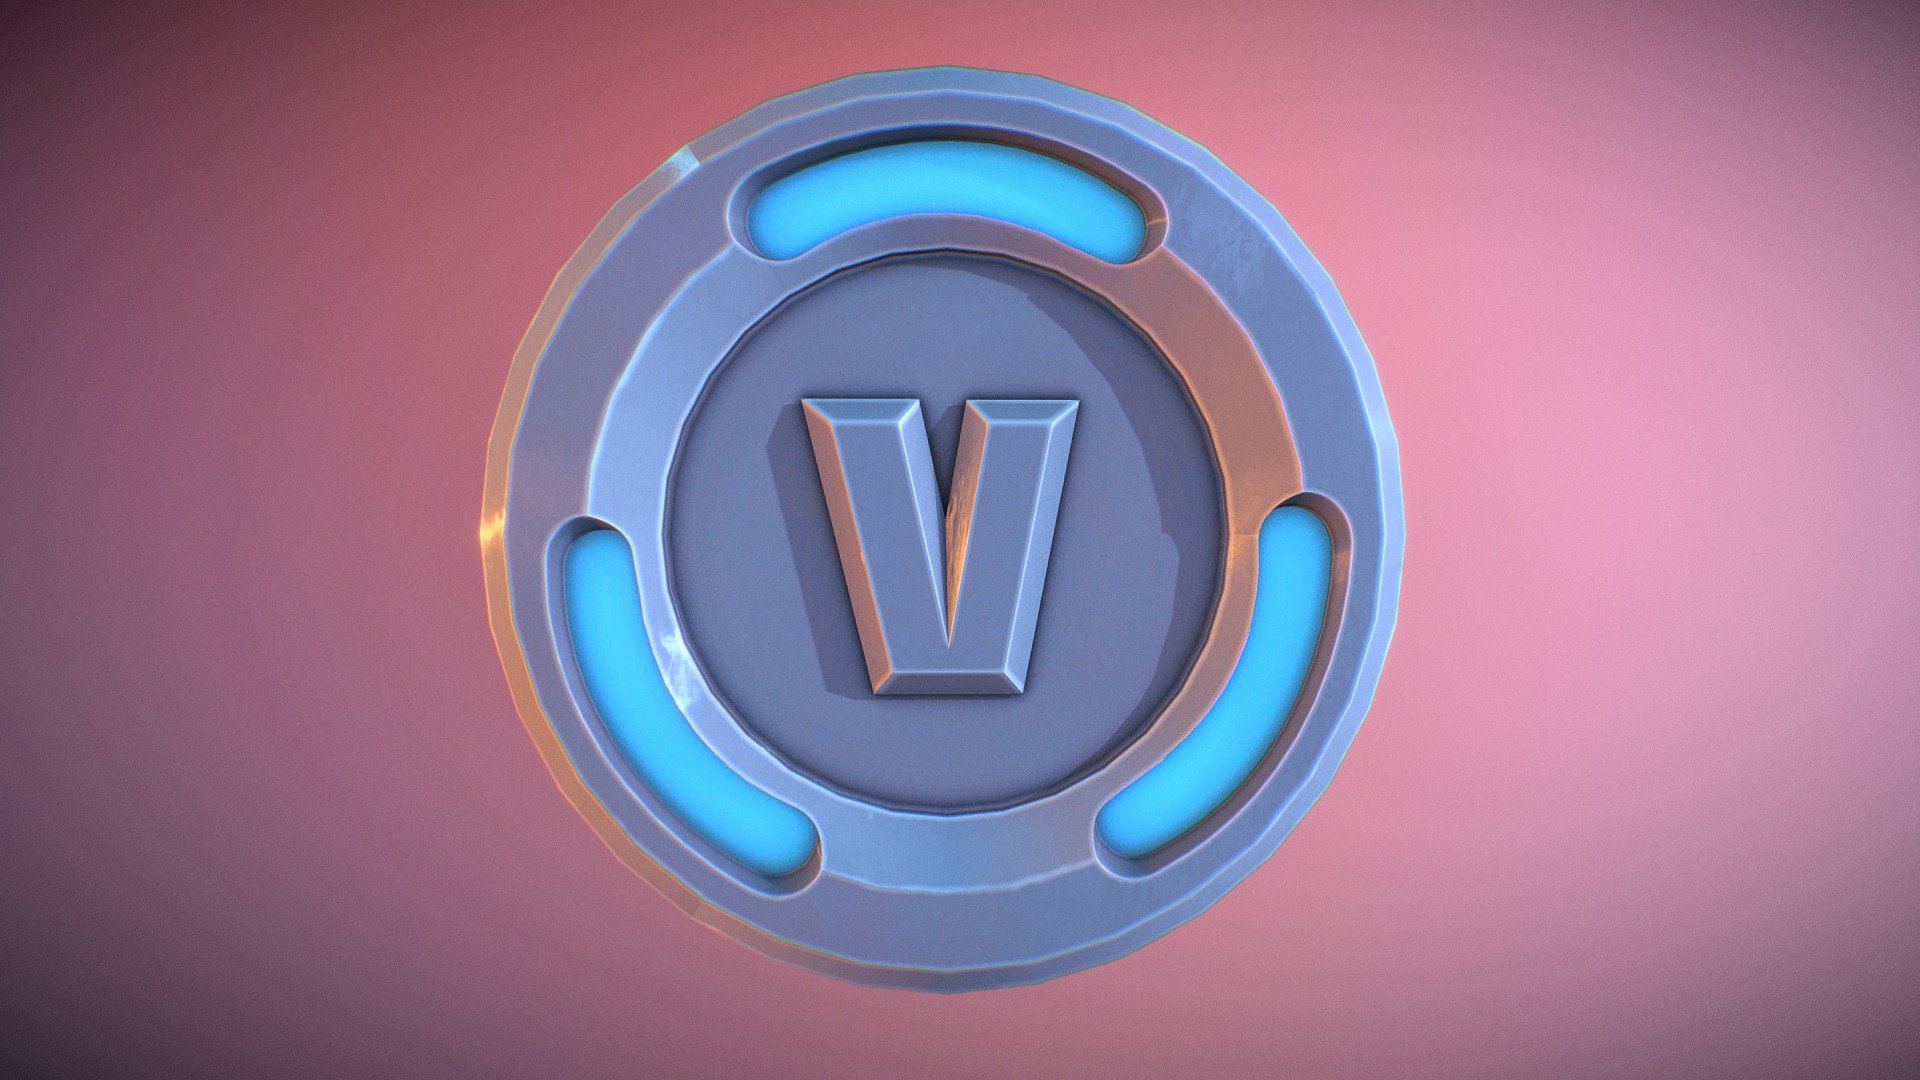 v-bucks coin from fortnite videogame.
Contains UV and PBR textures. You can use it in game eingines 3d model